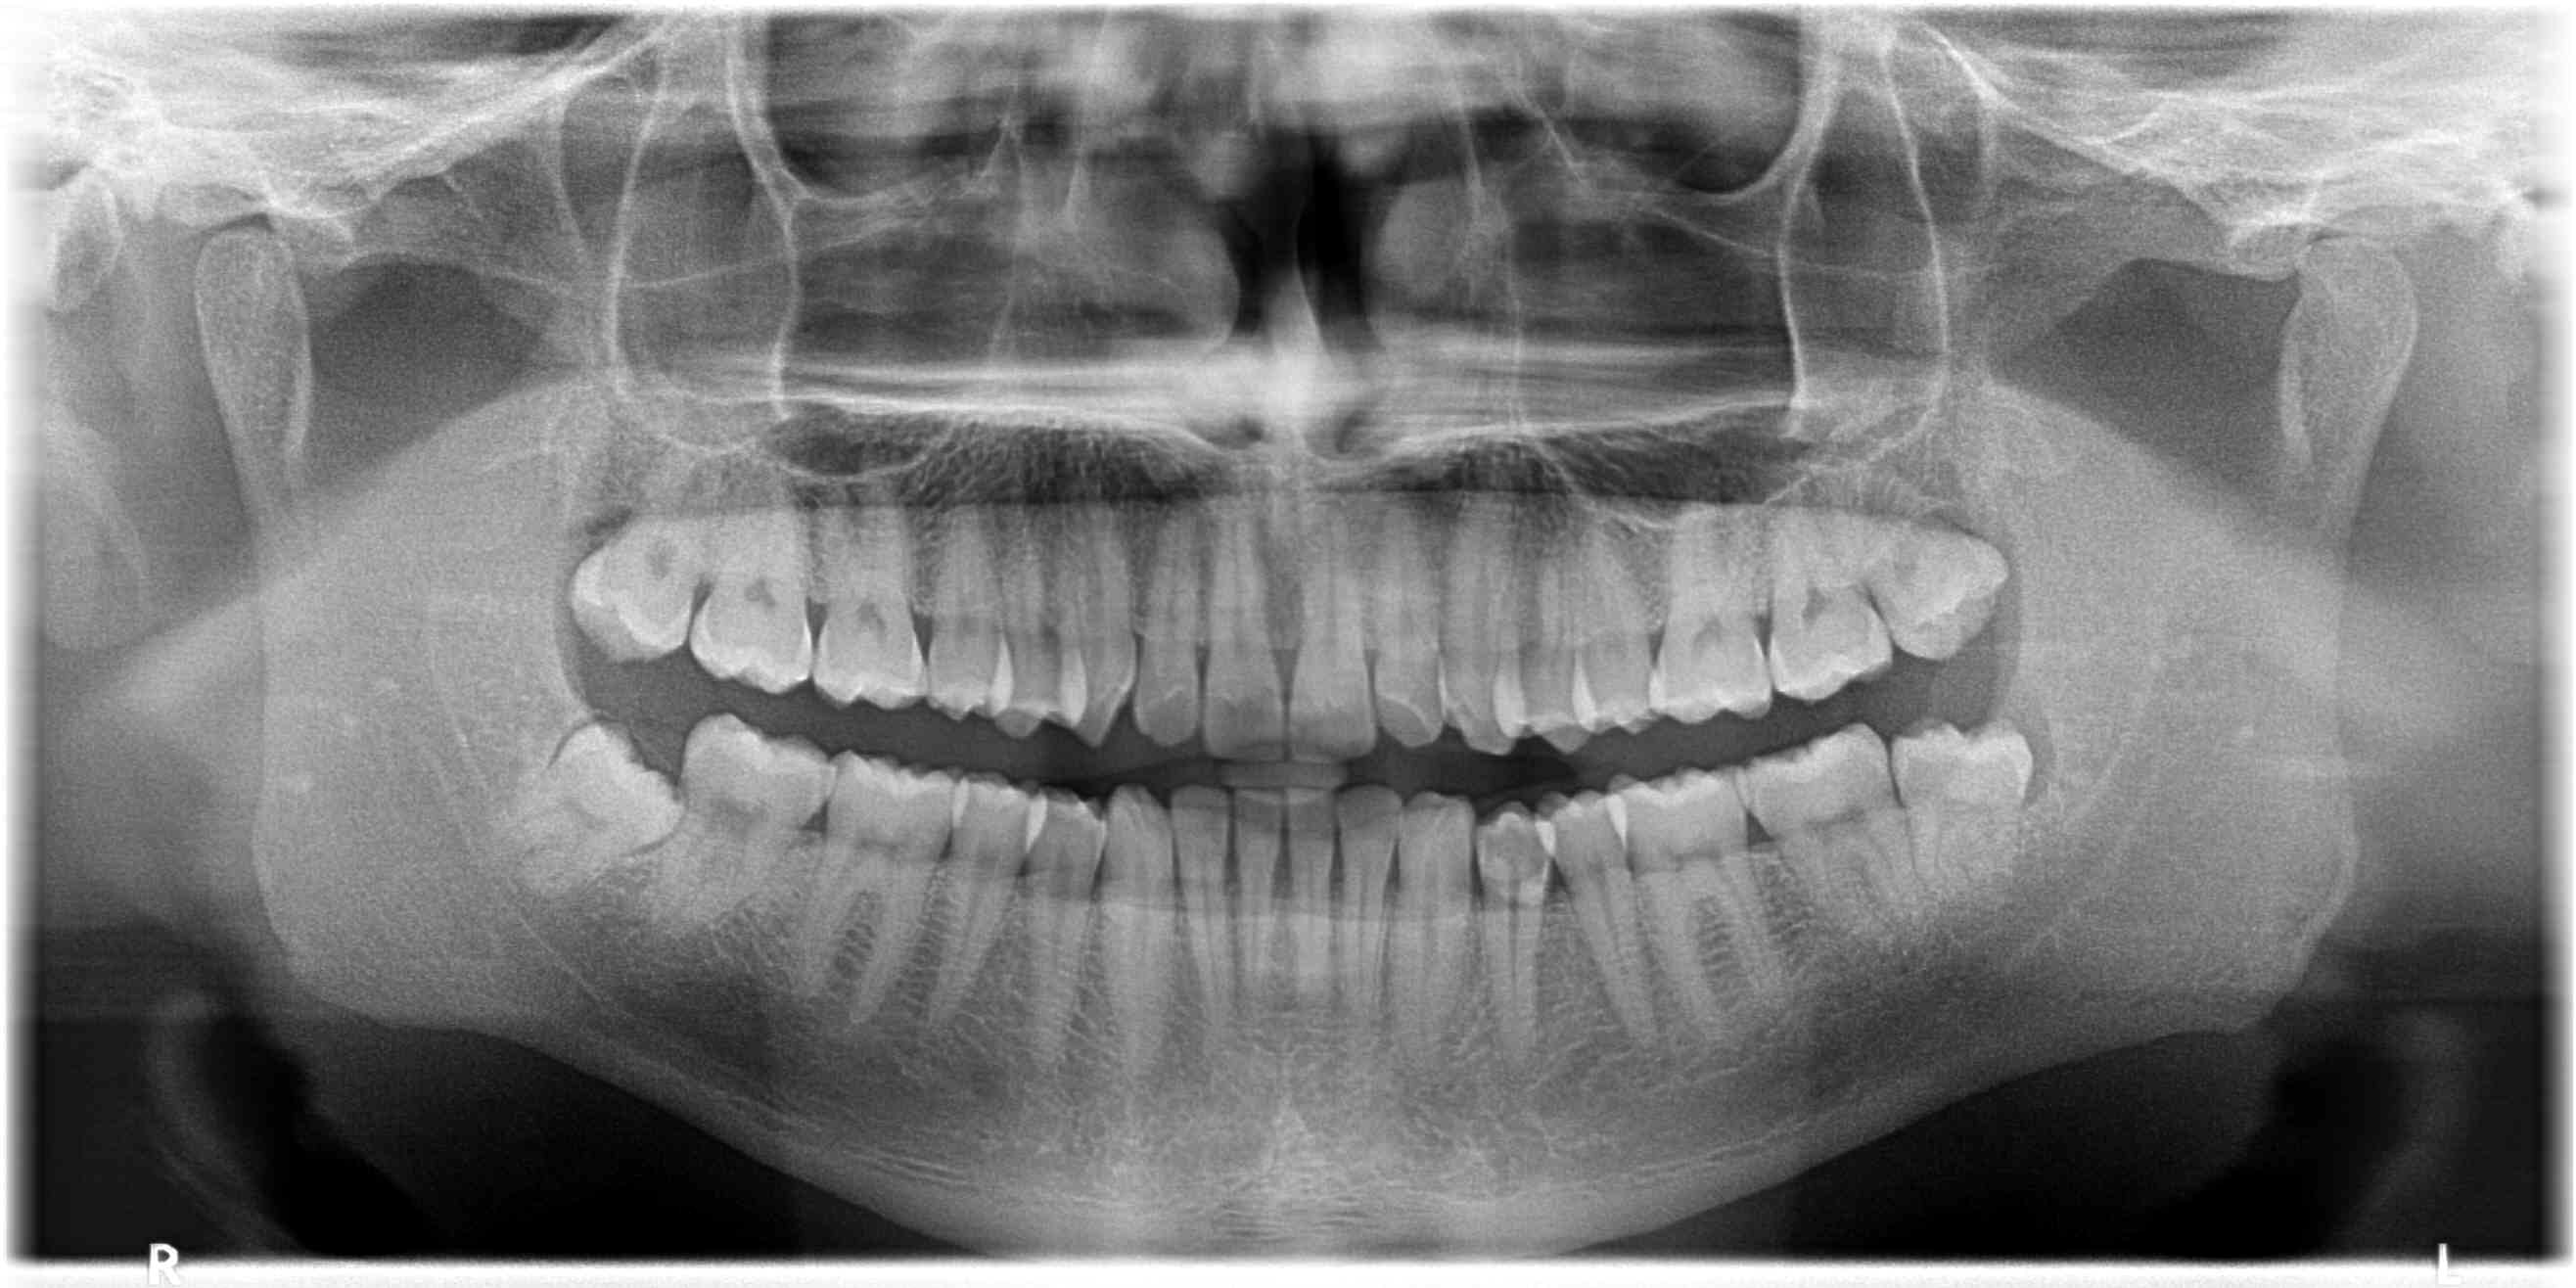 Why are Dental X-rays so important?